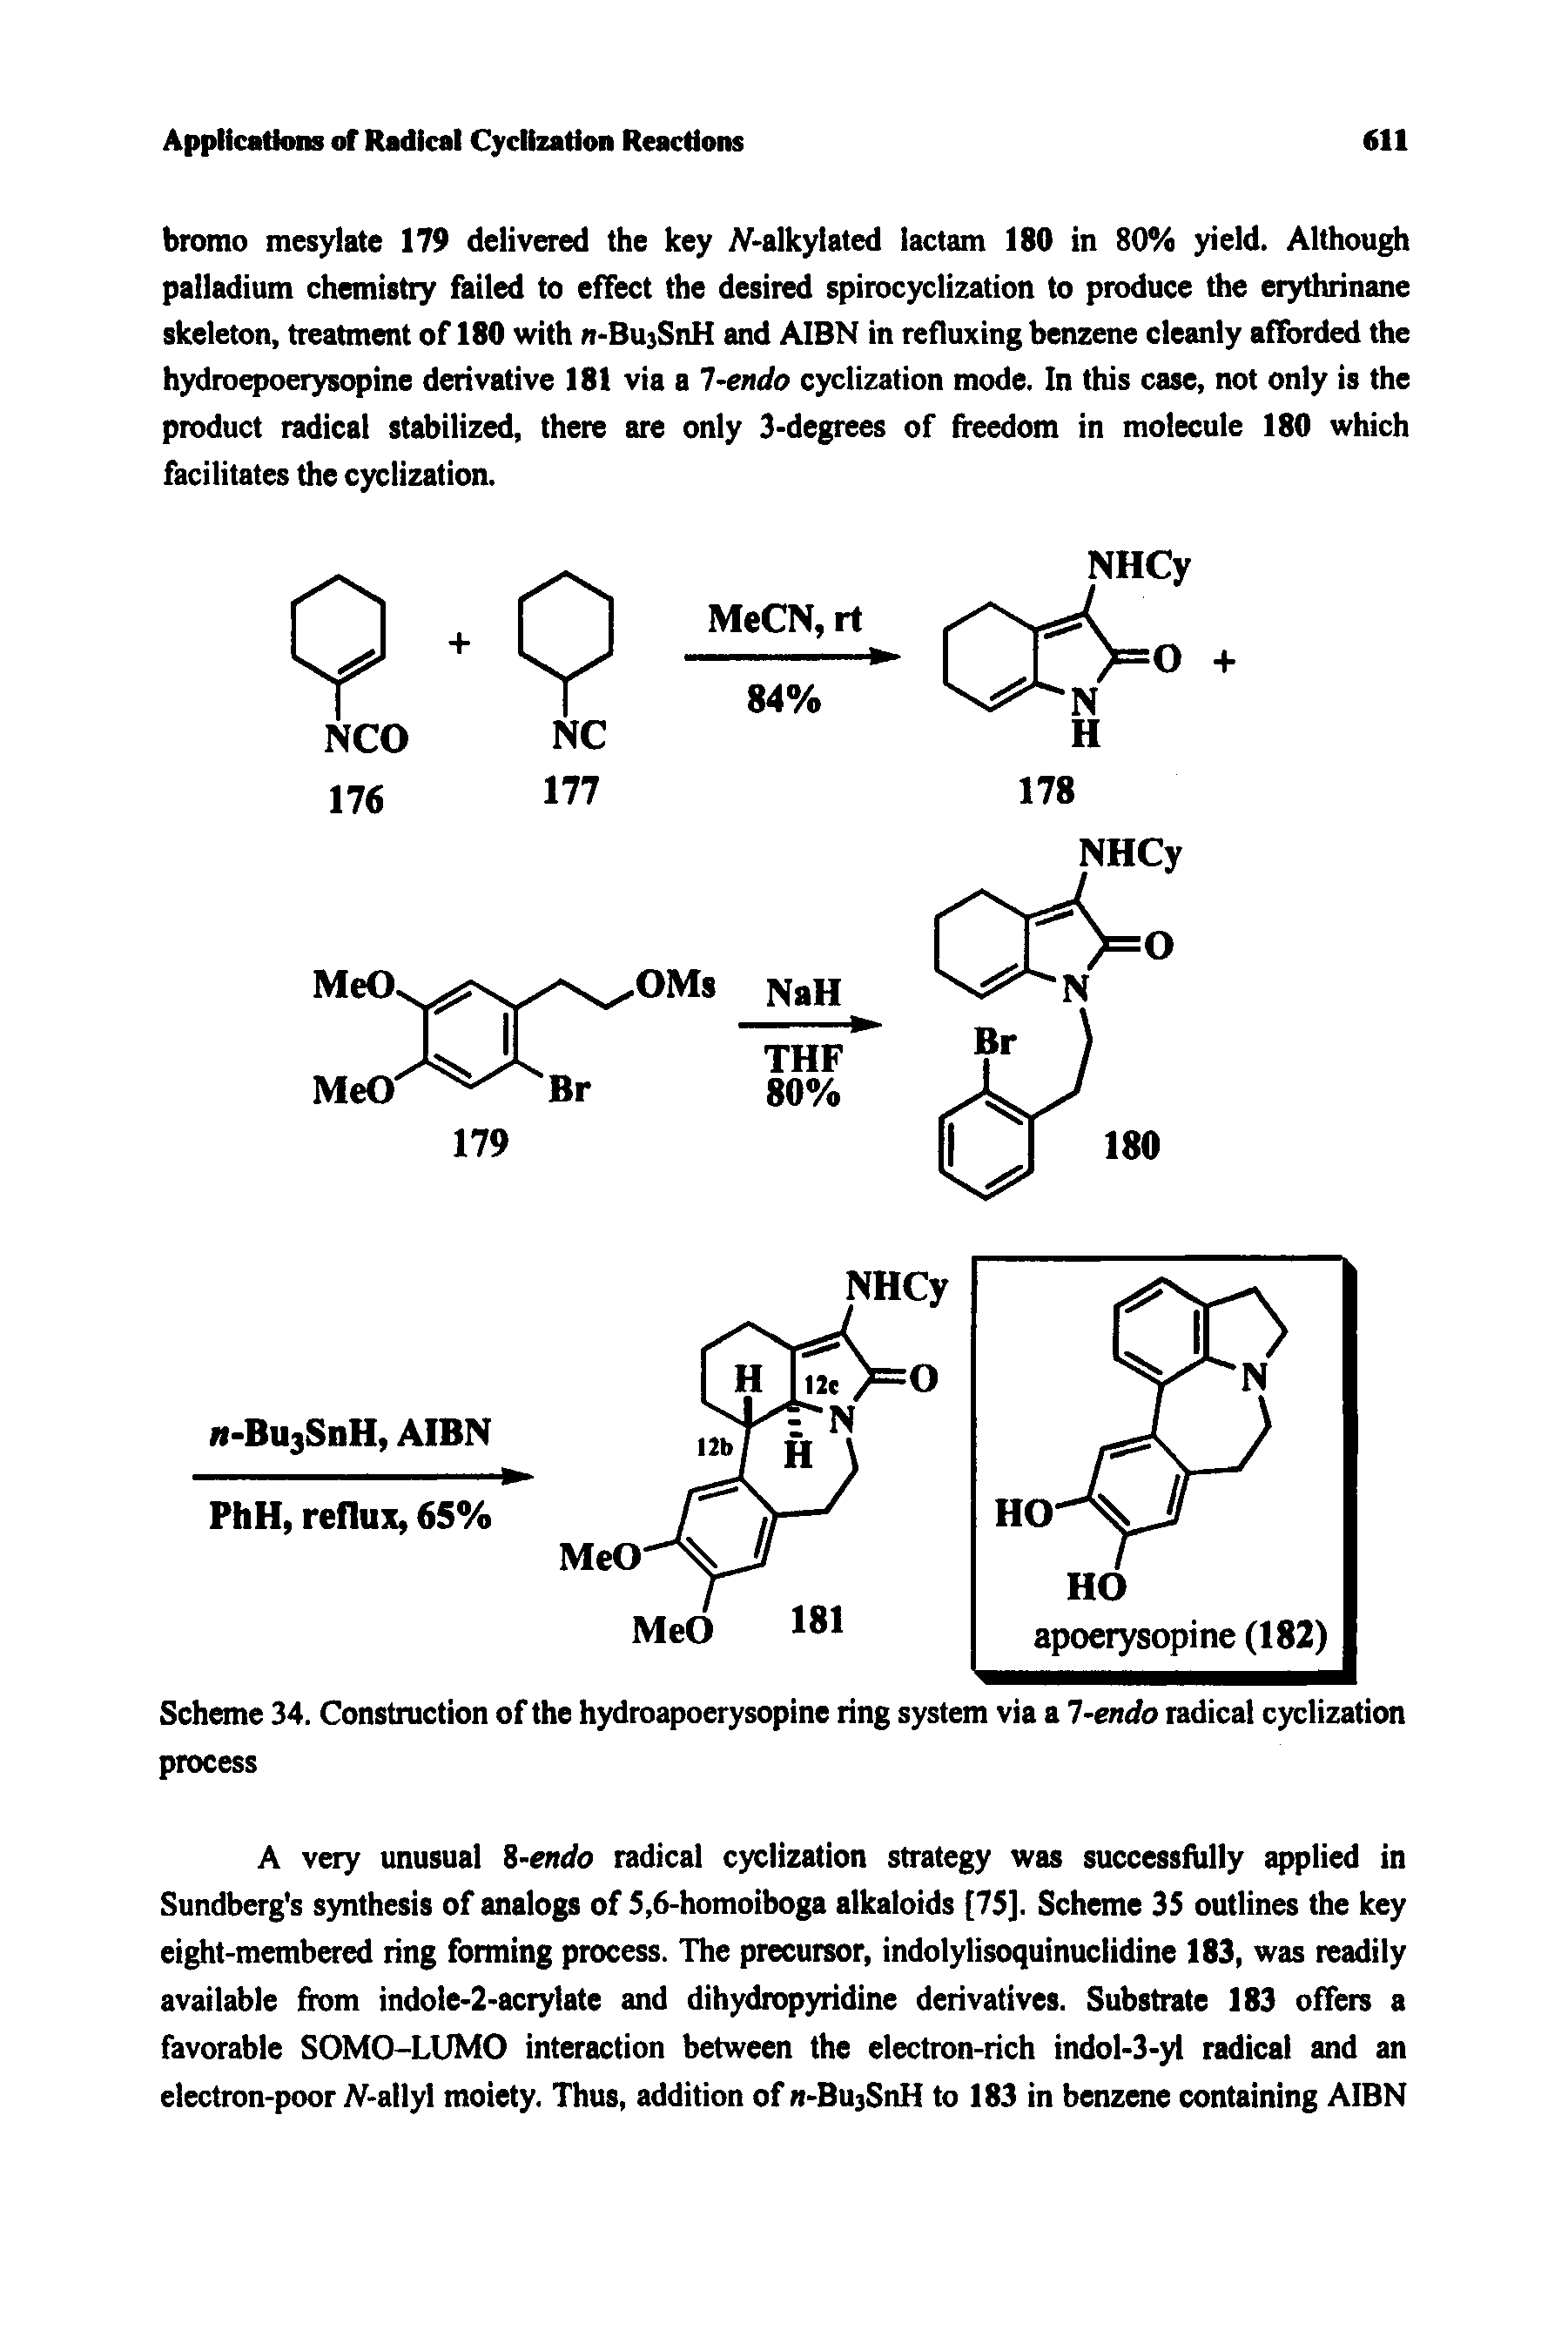 Scheme 34. Construction of the hydroapoerysopine ring system via a 1-endo radical cyclization process...